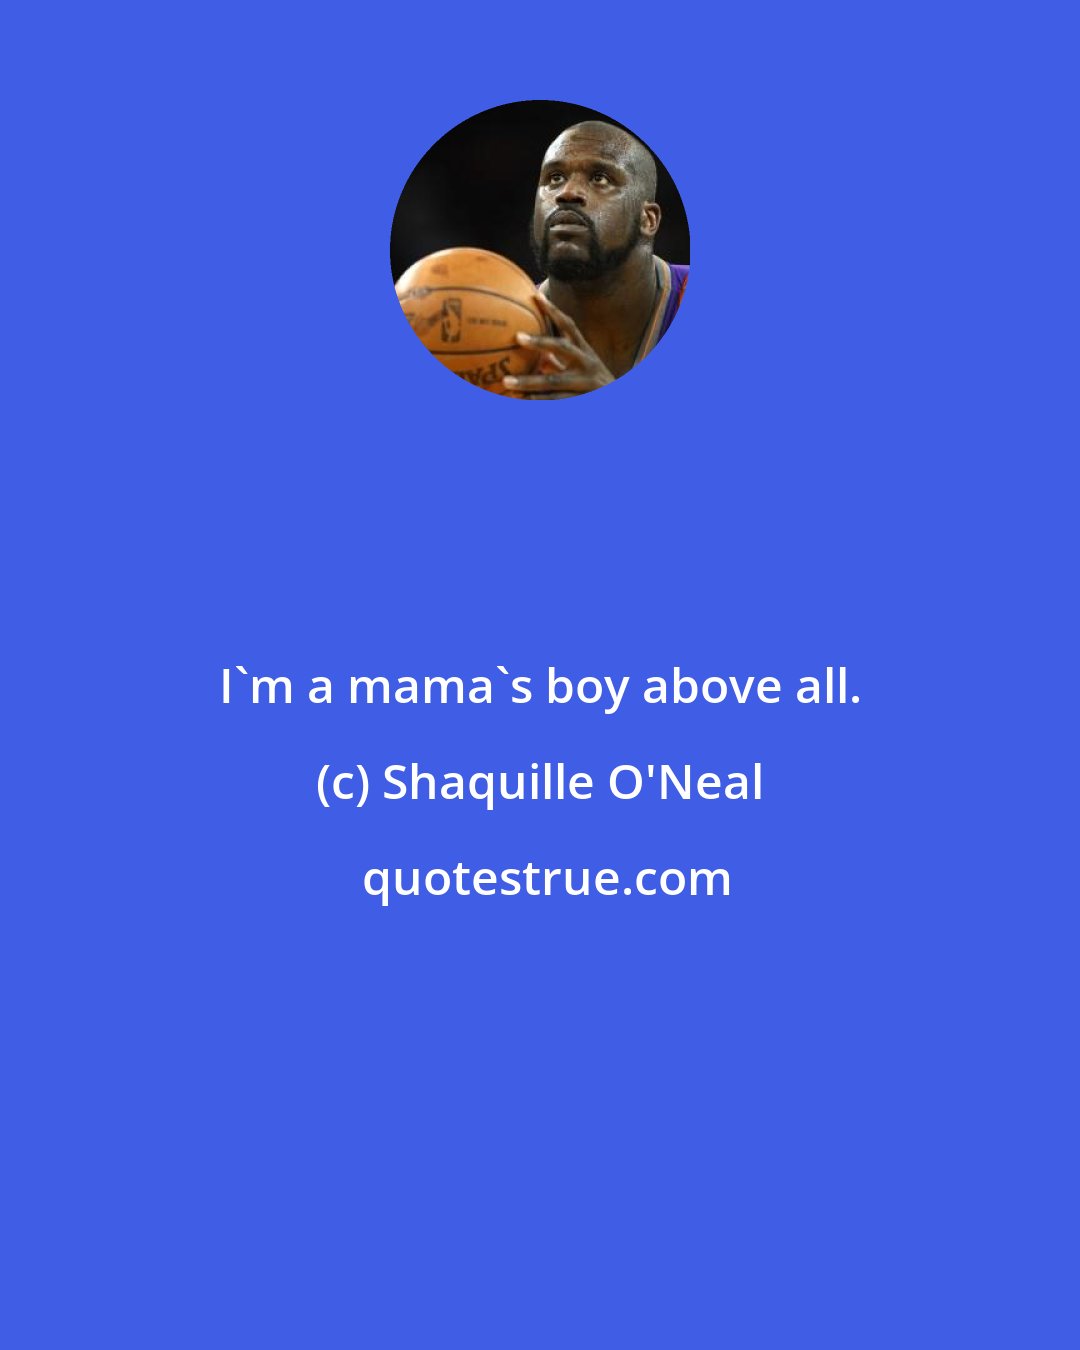 Shaquille O'Neal: I'm a mama's boy above all.